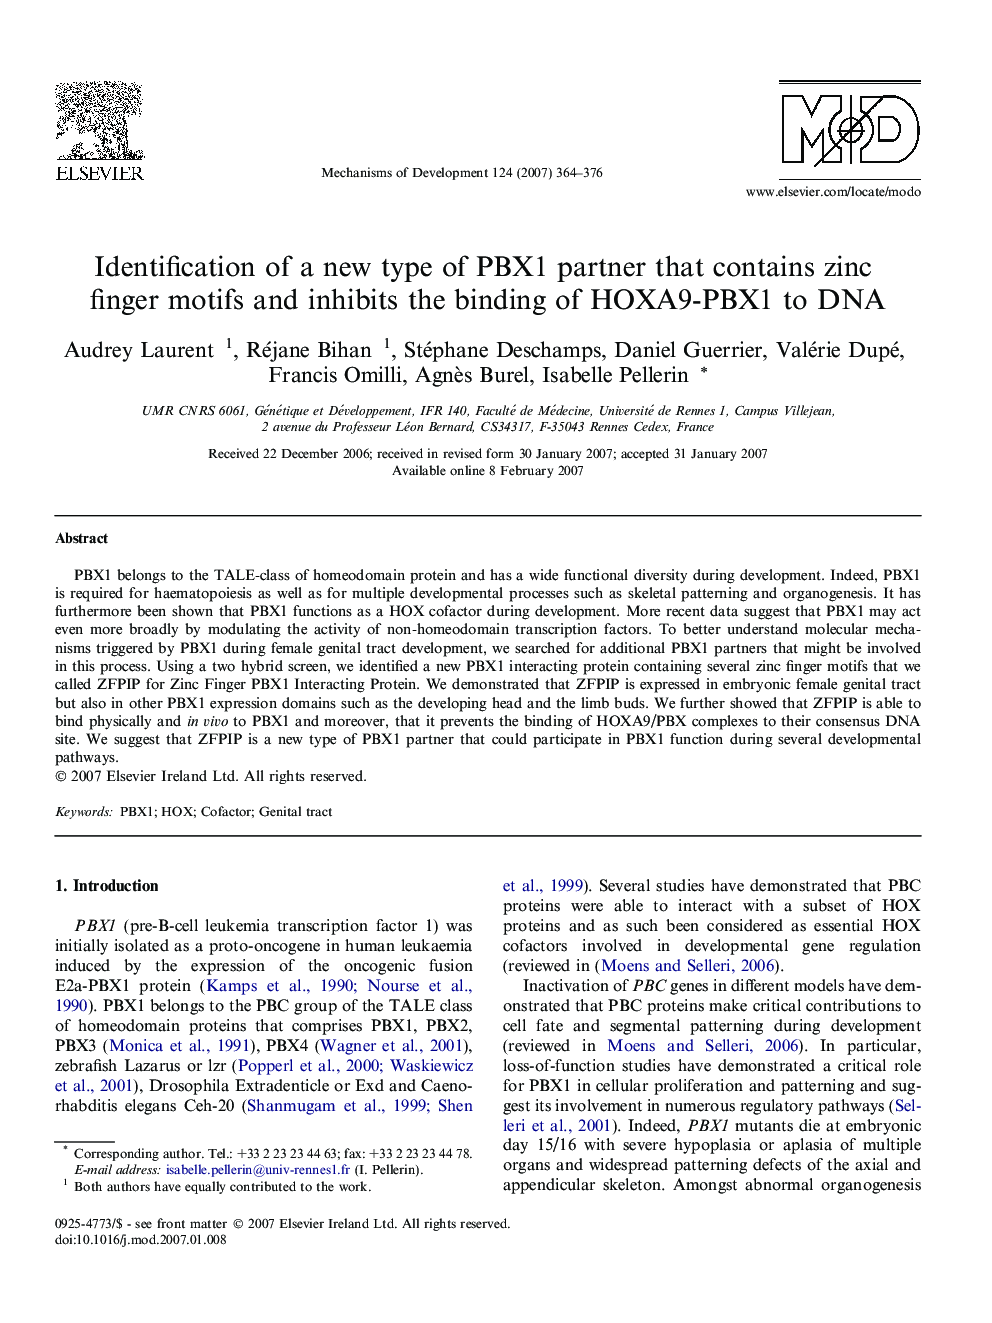 Identification of a new type of PBX1 partner that contains zinc finger motifs and inhibits the binding of HOXA9-PBX1 to DNA